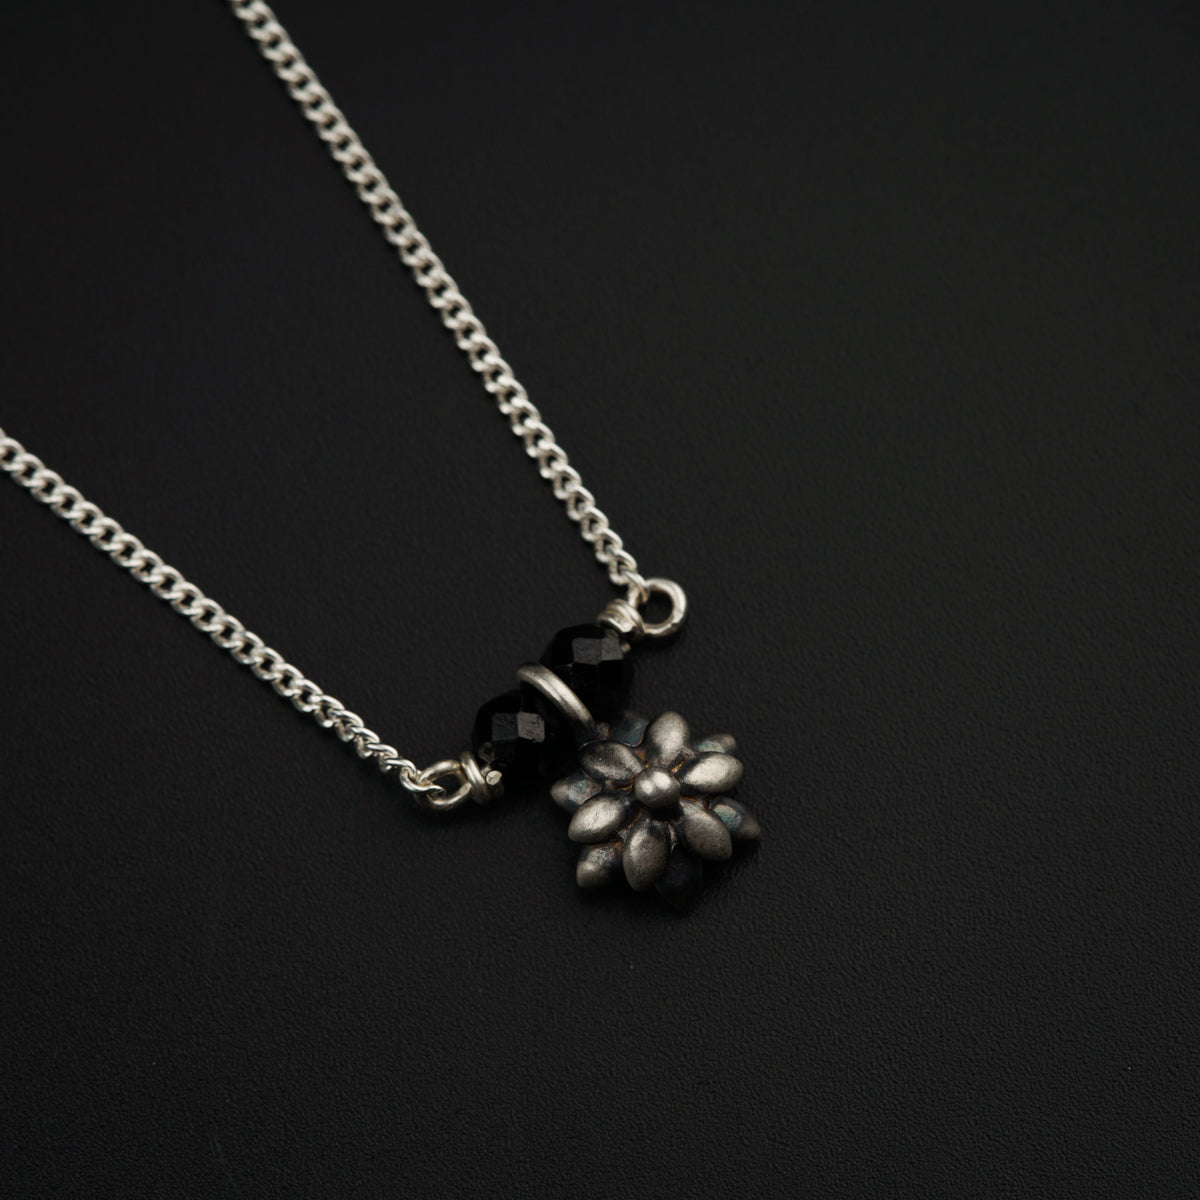 a black and white photo of a flower on a chain